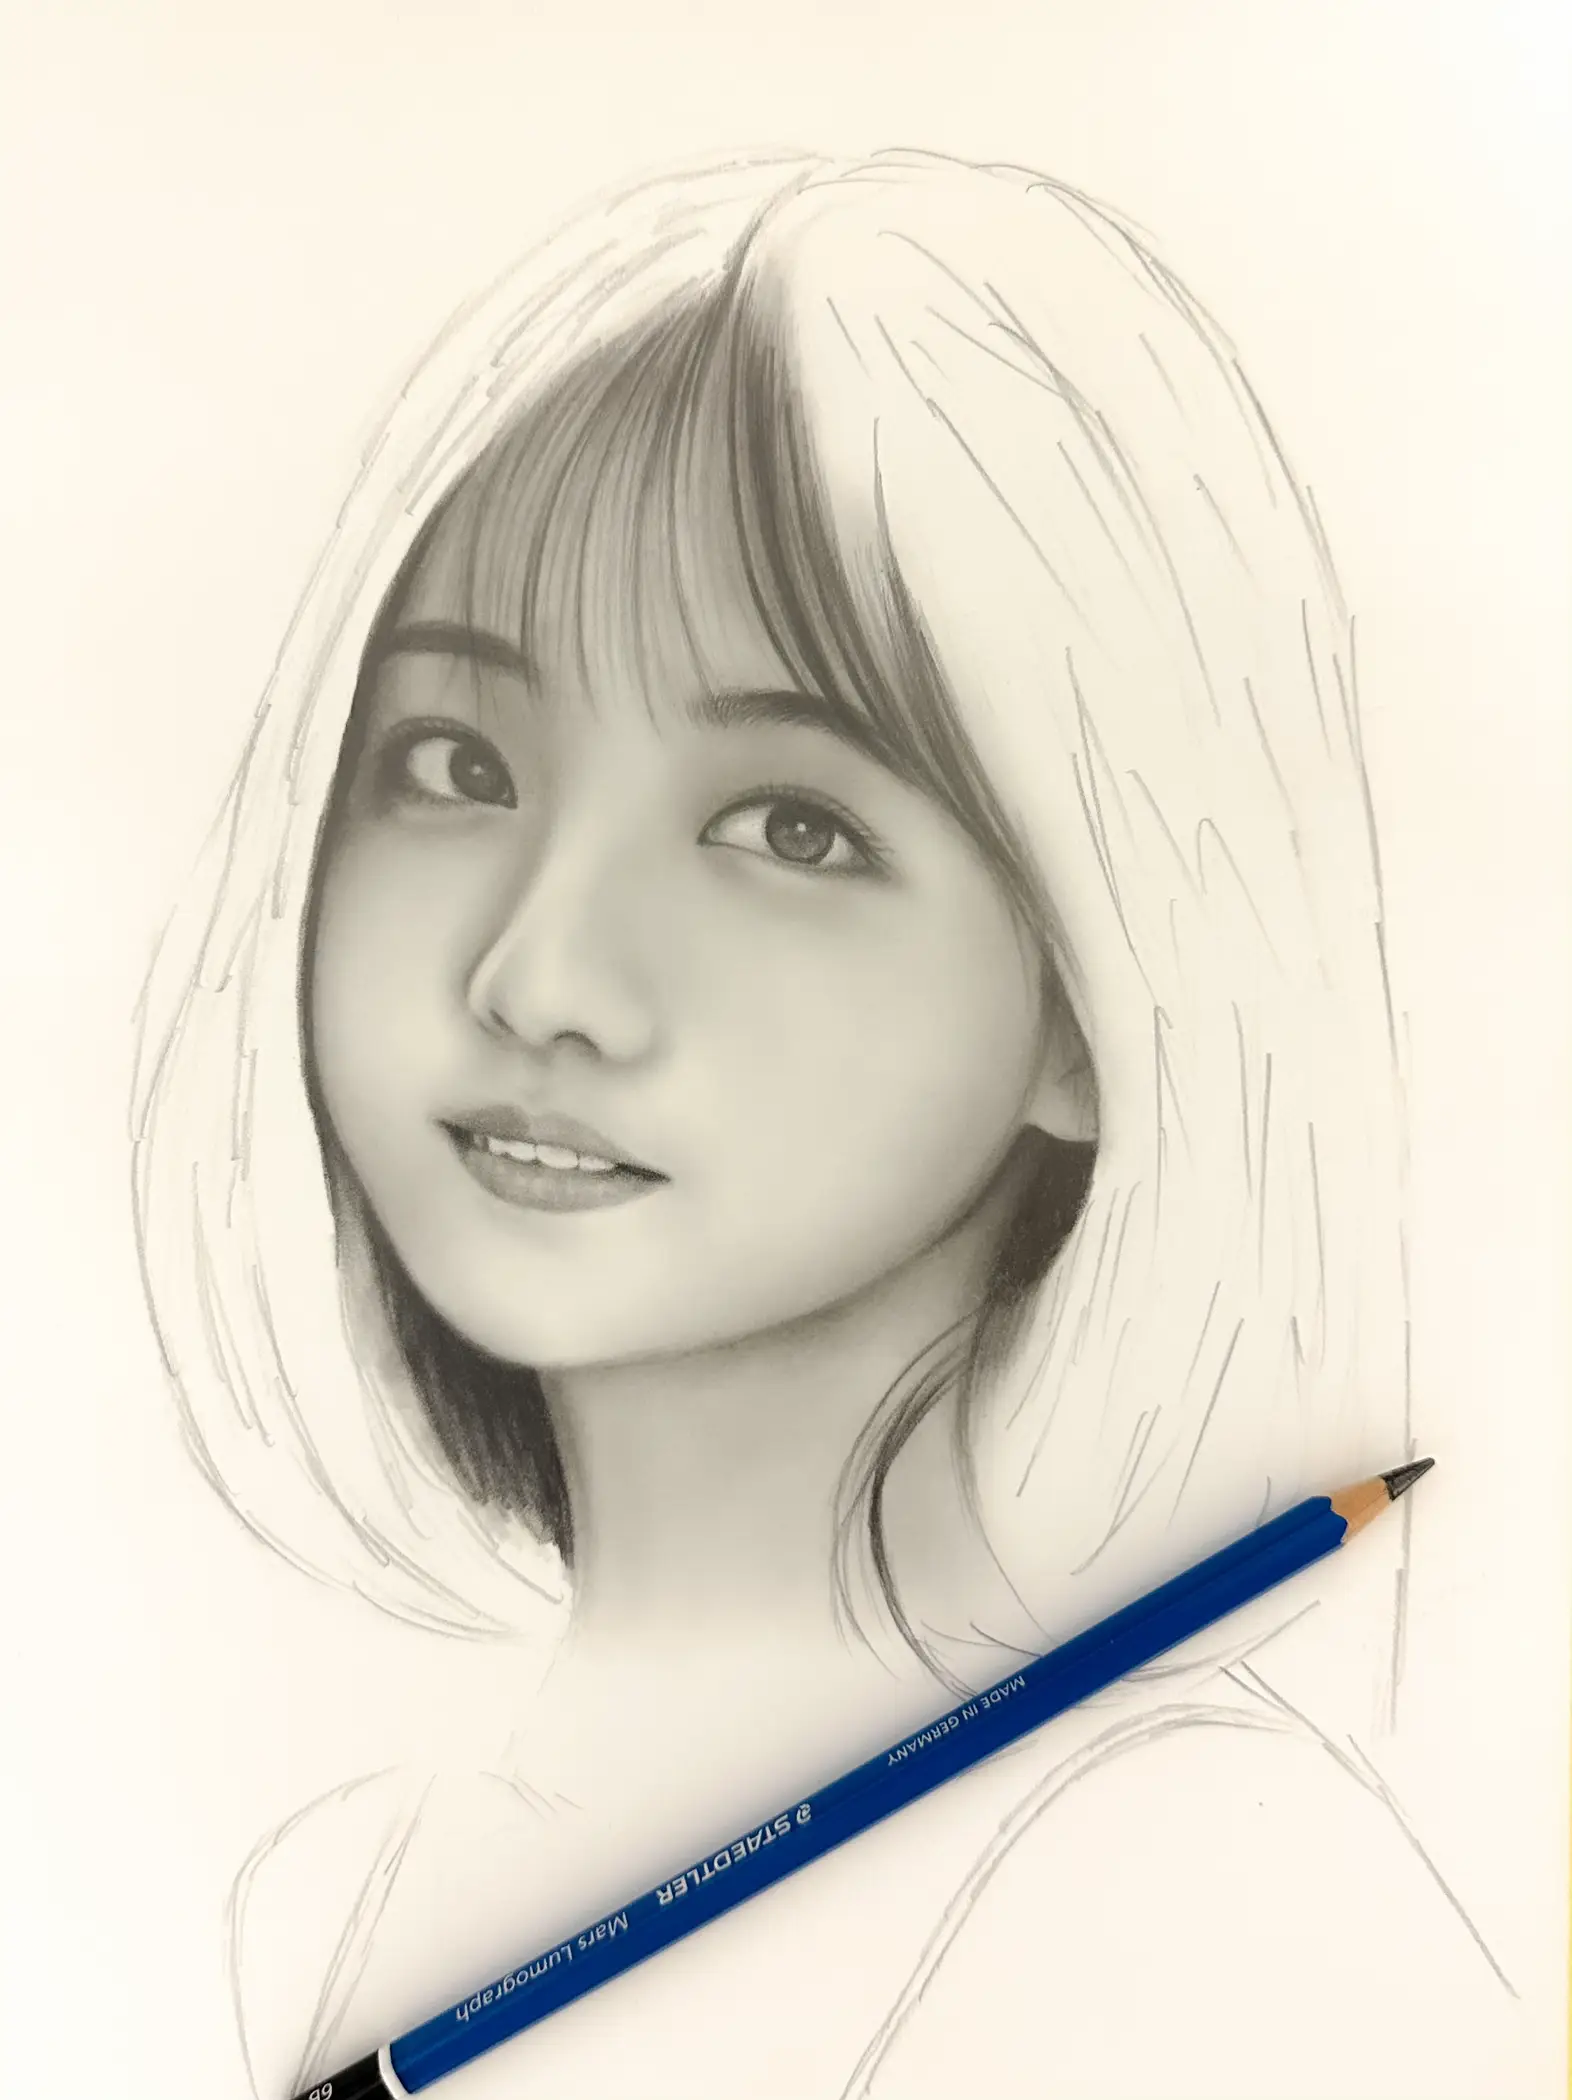 How to Draw a Pretty Girl - DrawingNow